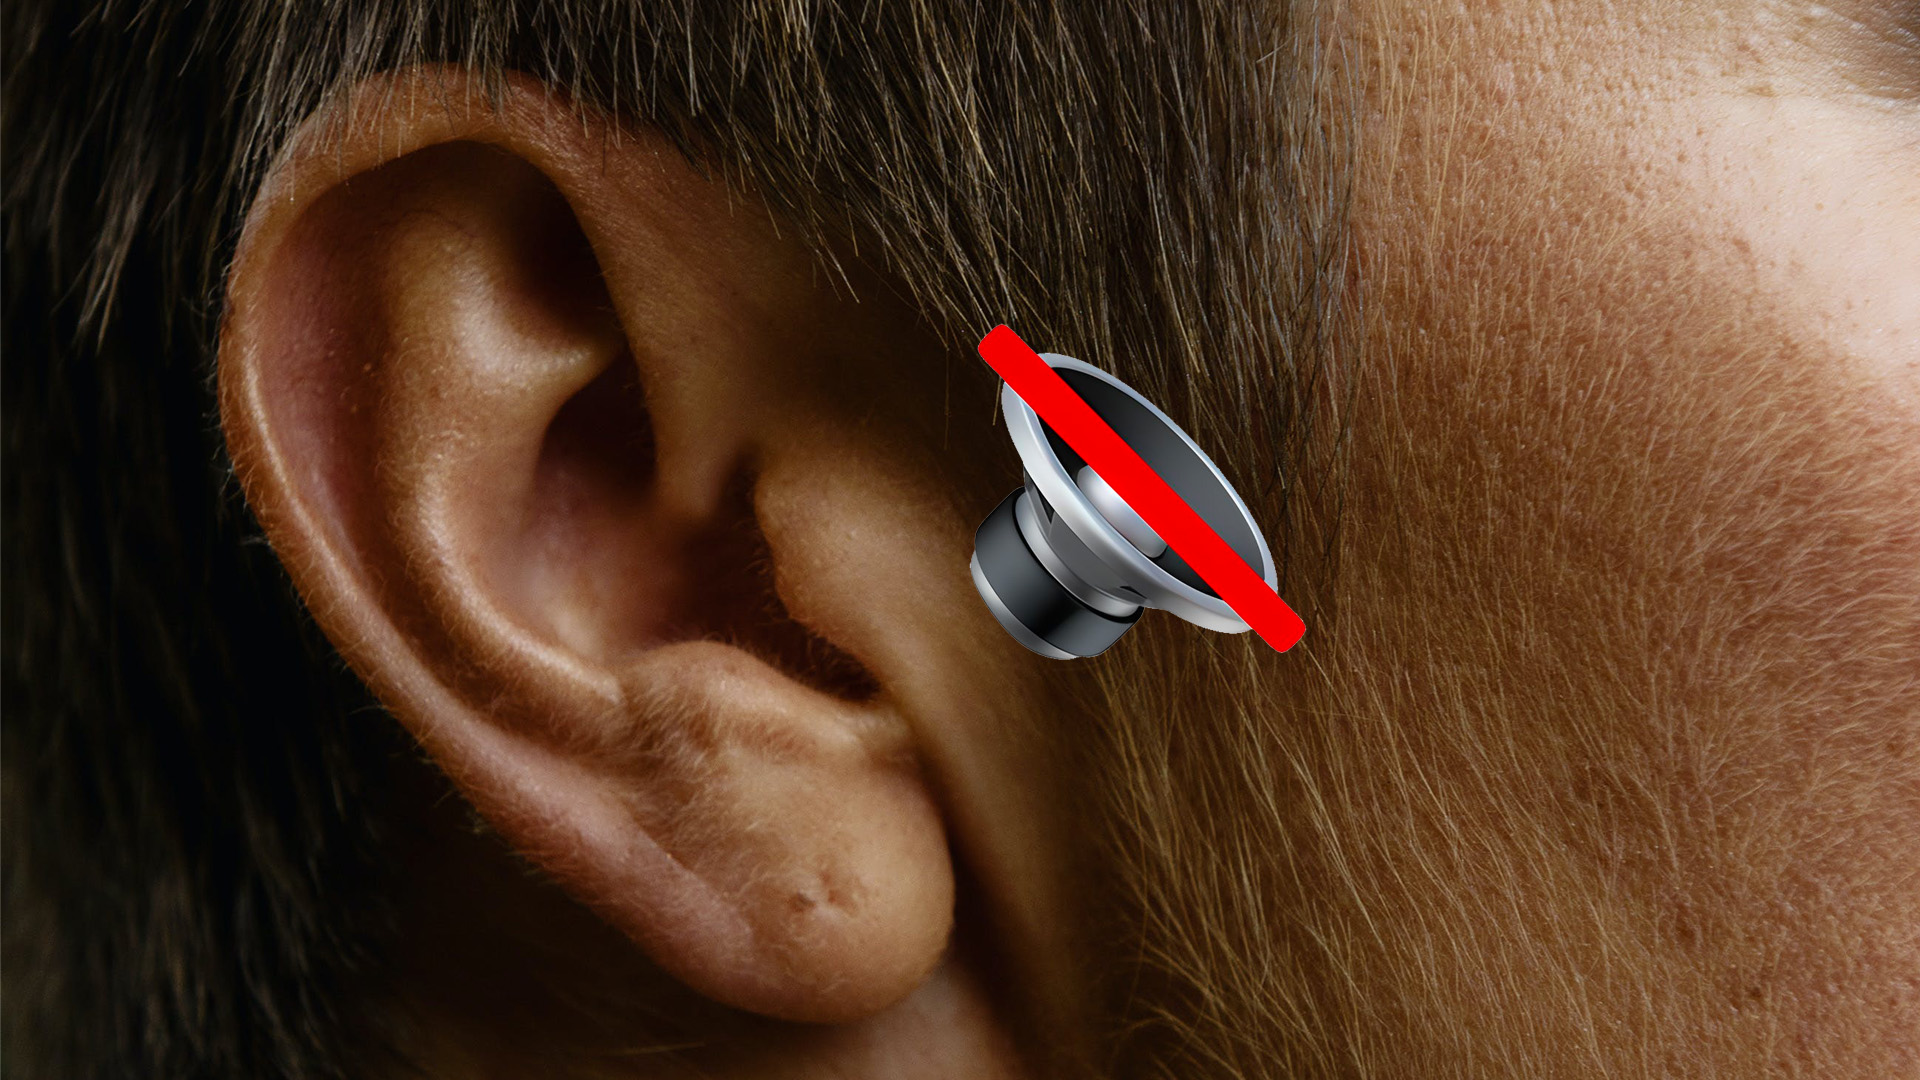 25% Of Under-35s Exhibit Signs Of Hearing Loss, Study Shows